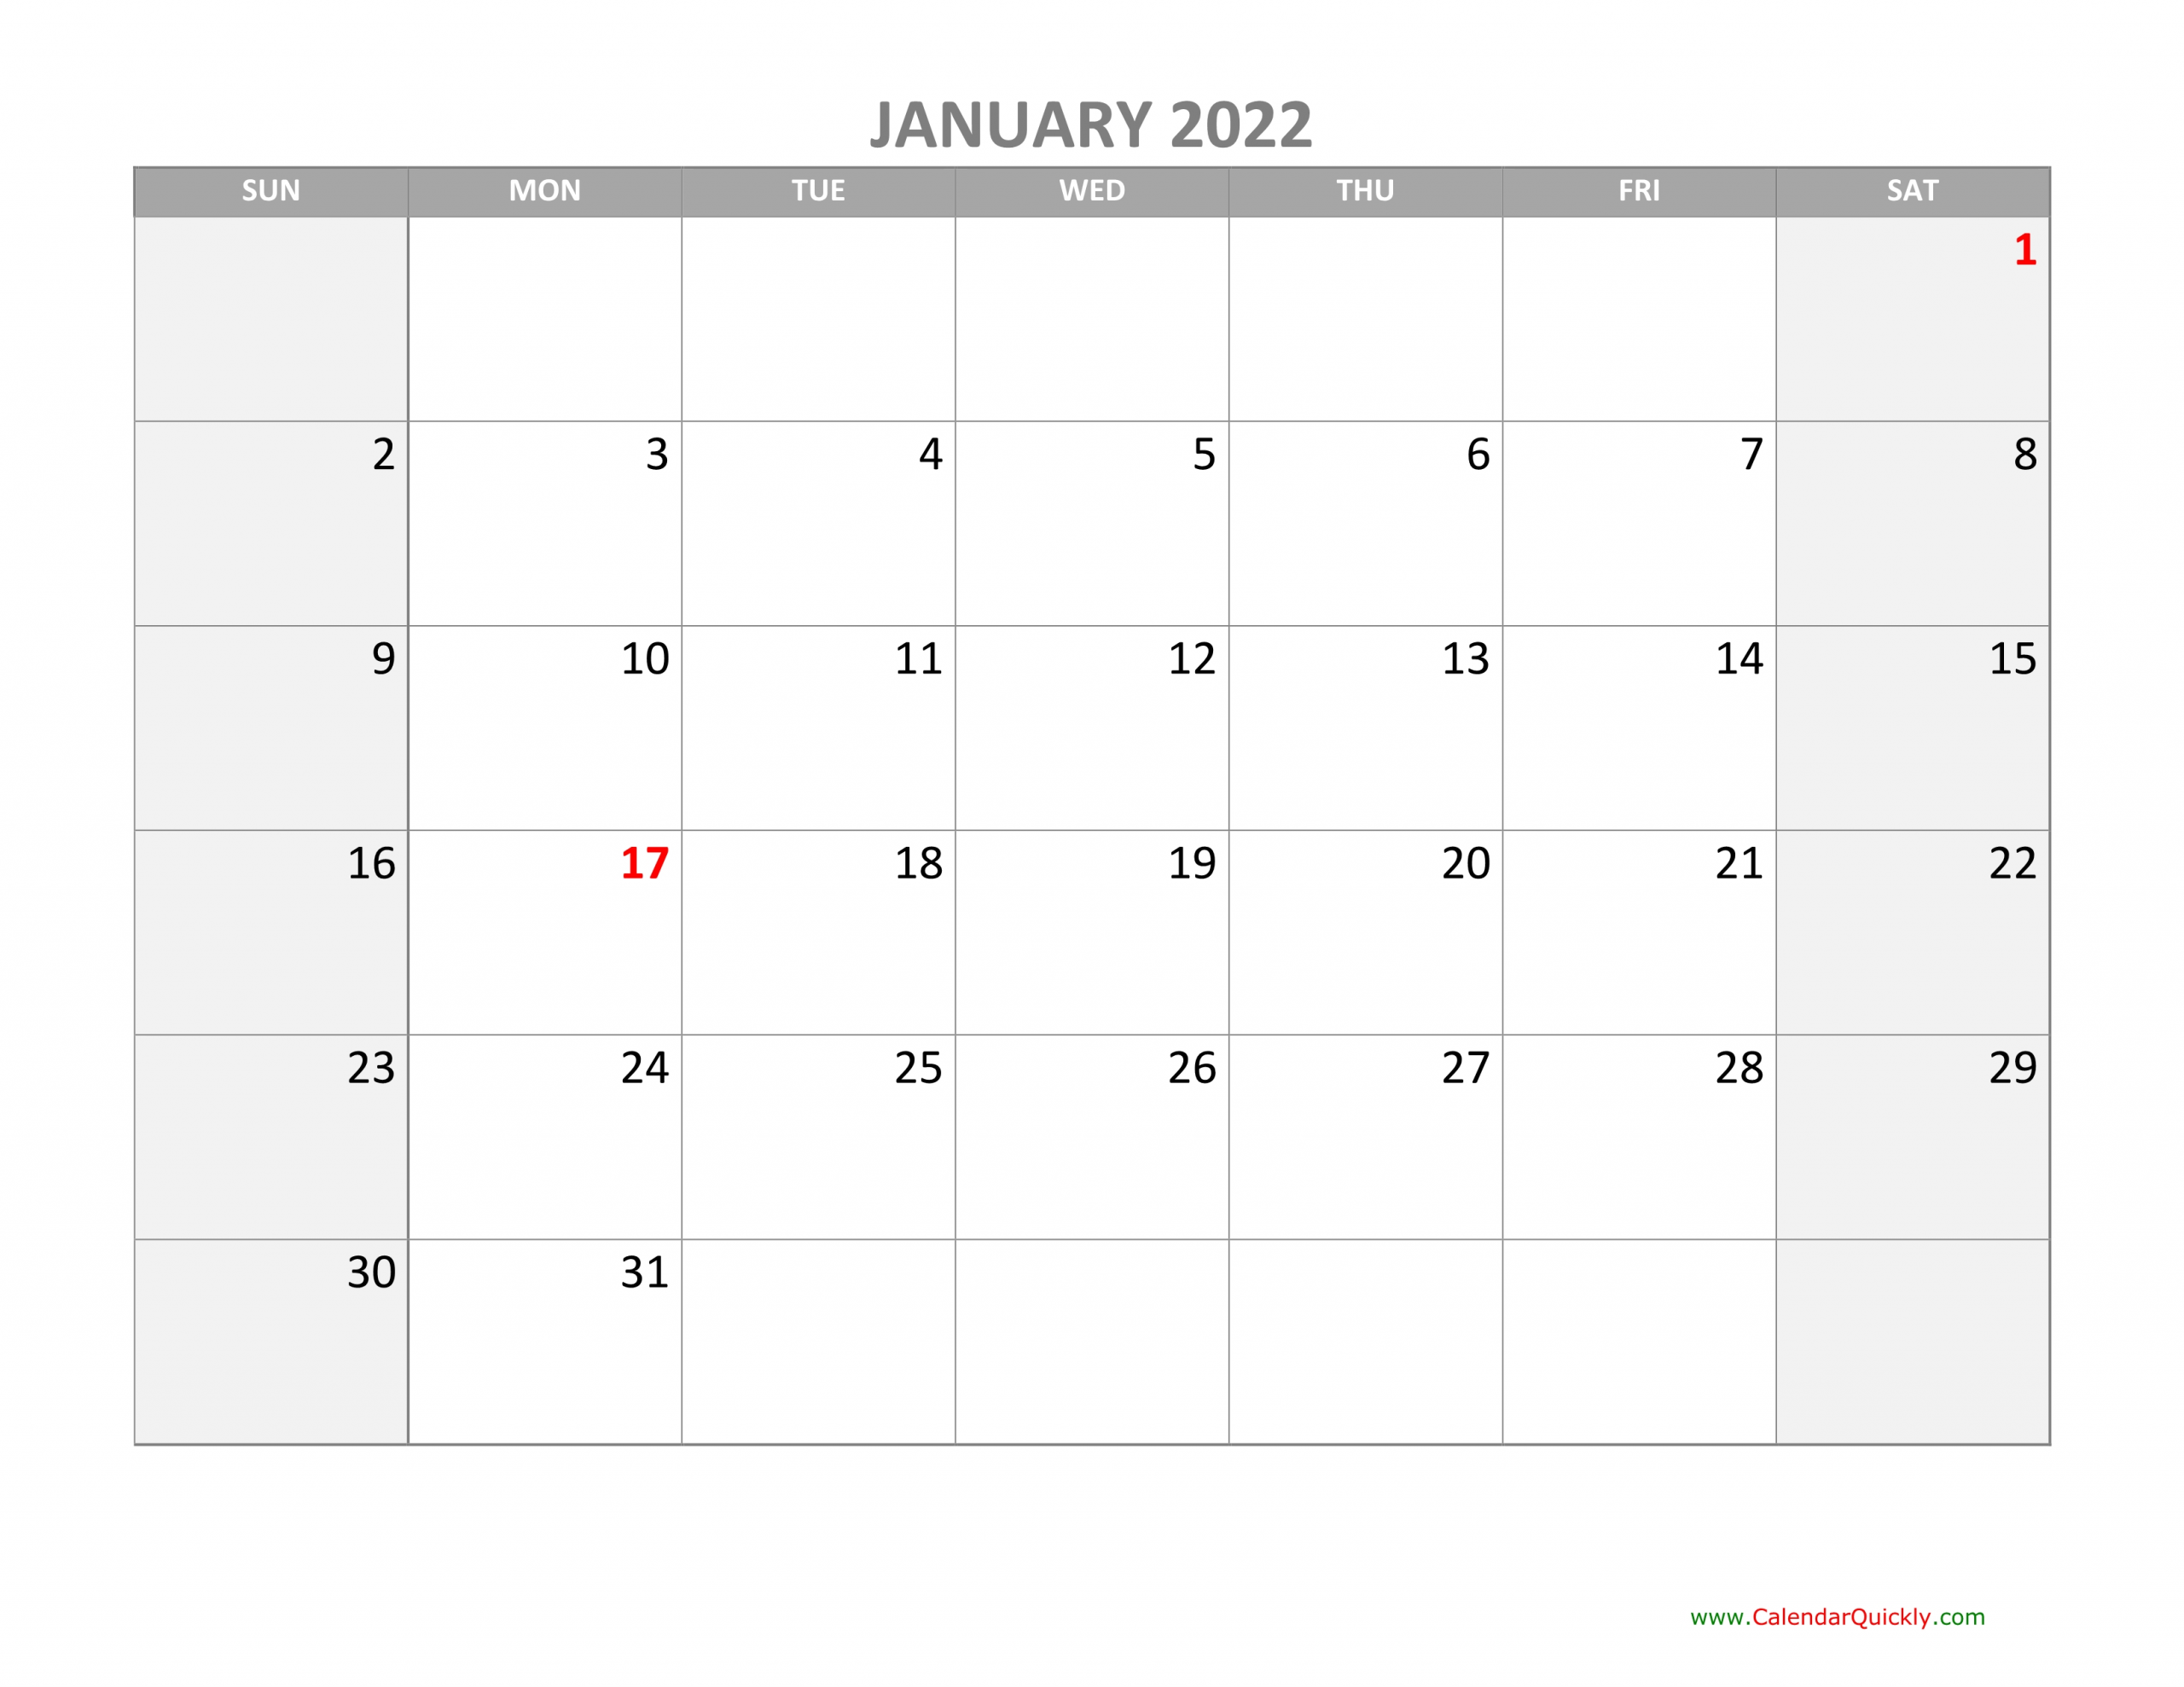 Monthly Calendar 2022 With Holidays | Calendar Quickly